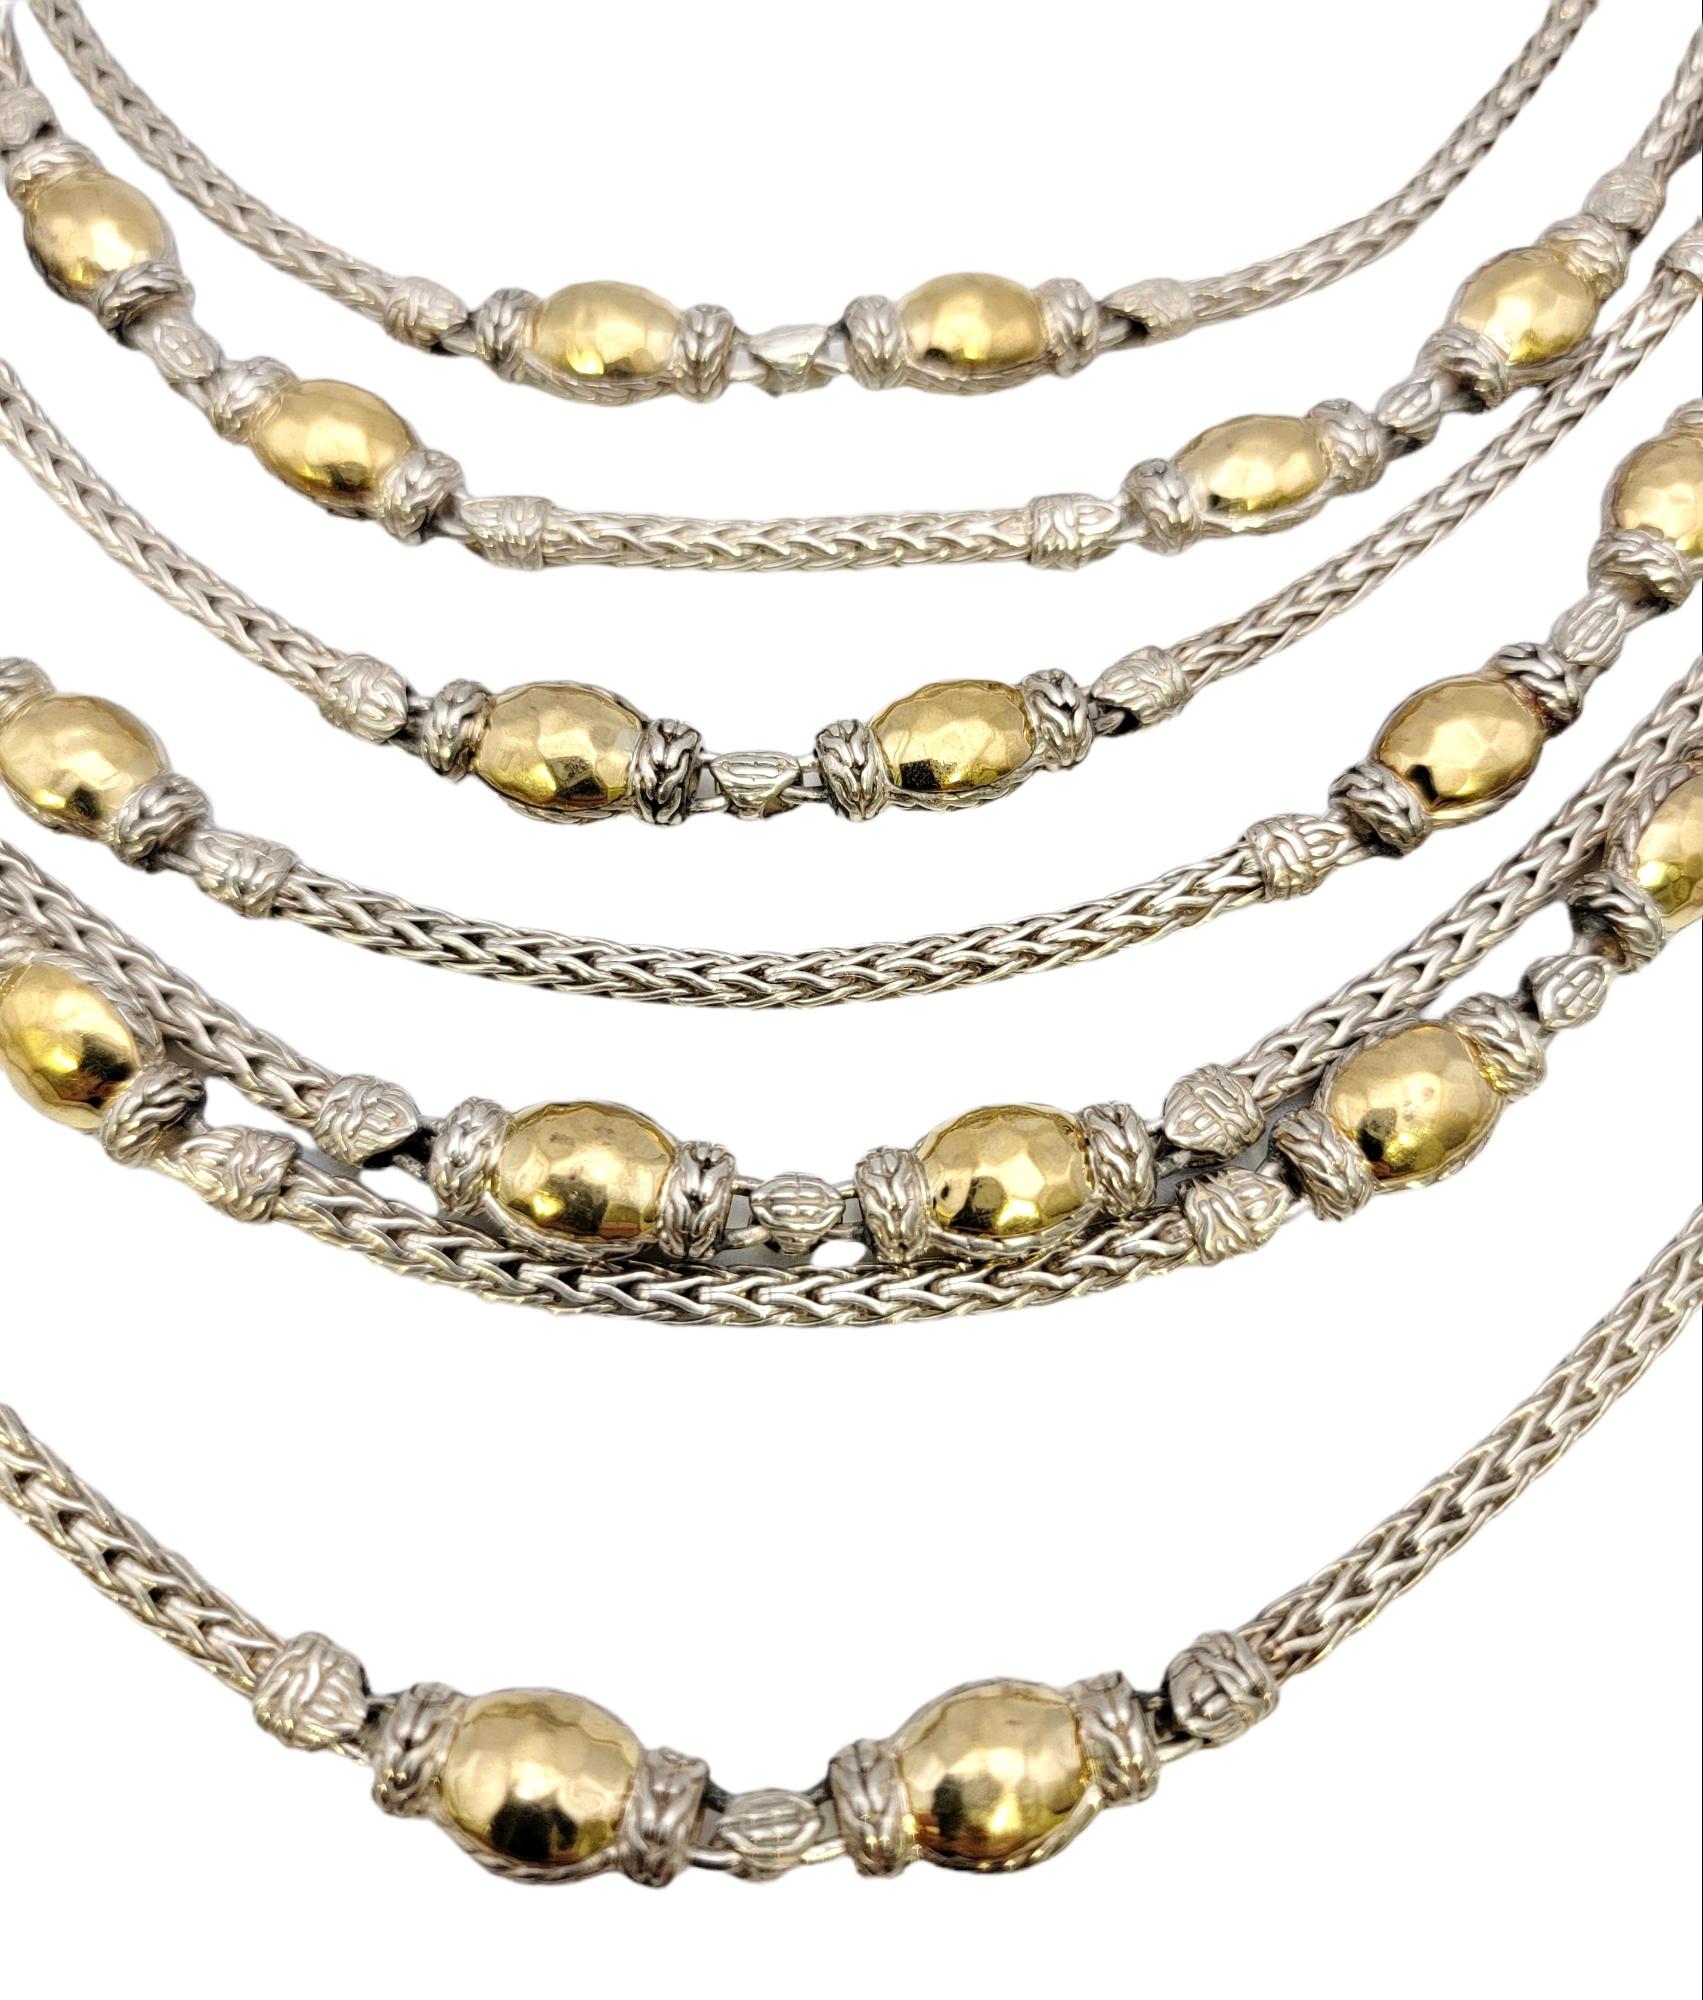 Incredible statement piece by designer, John Hardy. Part of the Palu collection, this seven strand necklace  features a series of sterling silver wheat chains, graduated in length, and embellished with hammered 22 karat yellow gold beaded stations